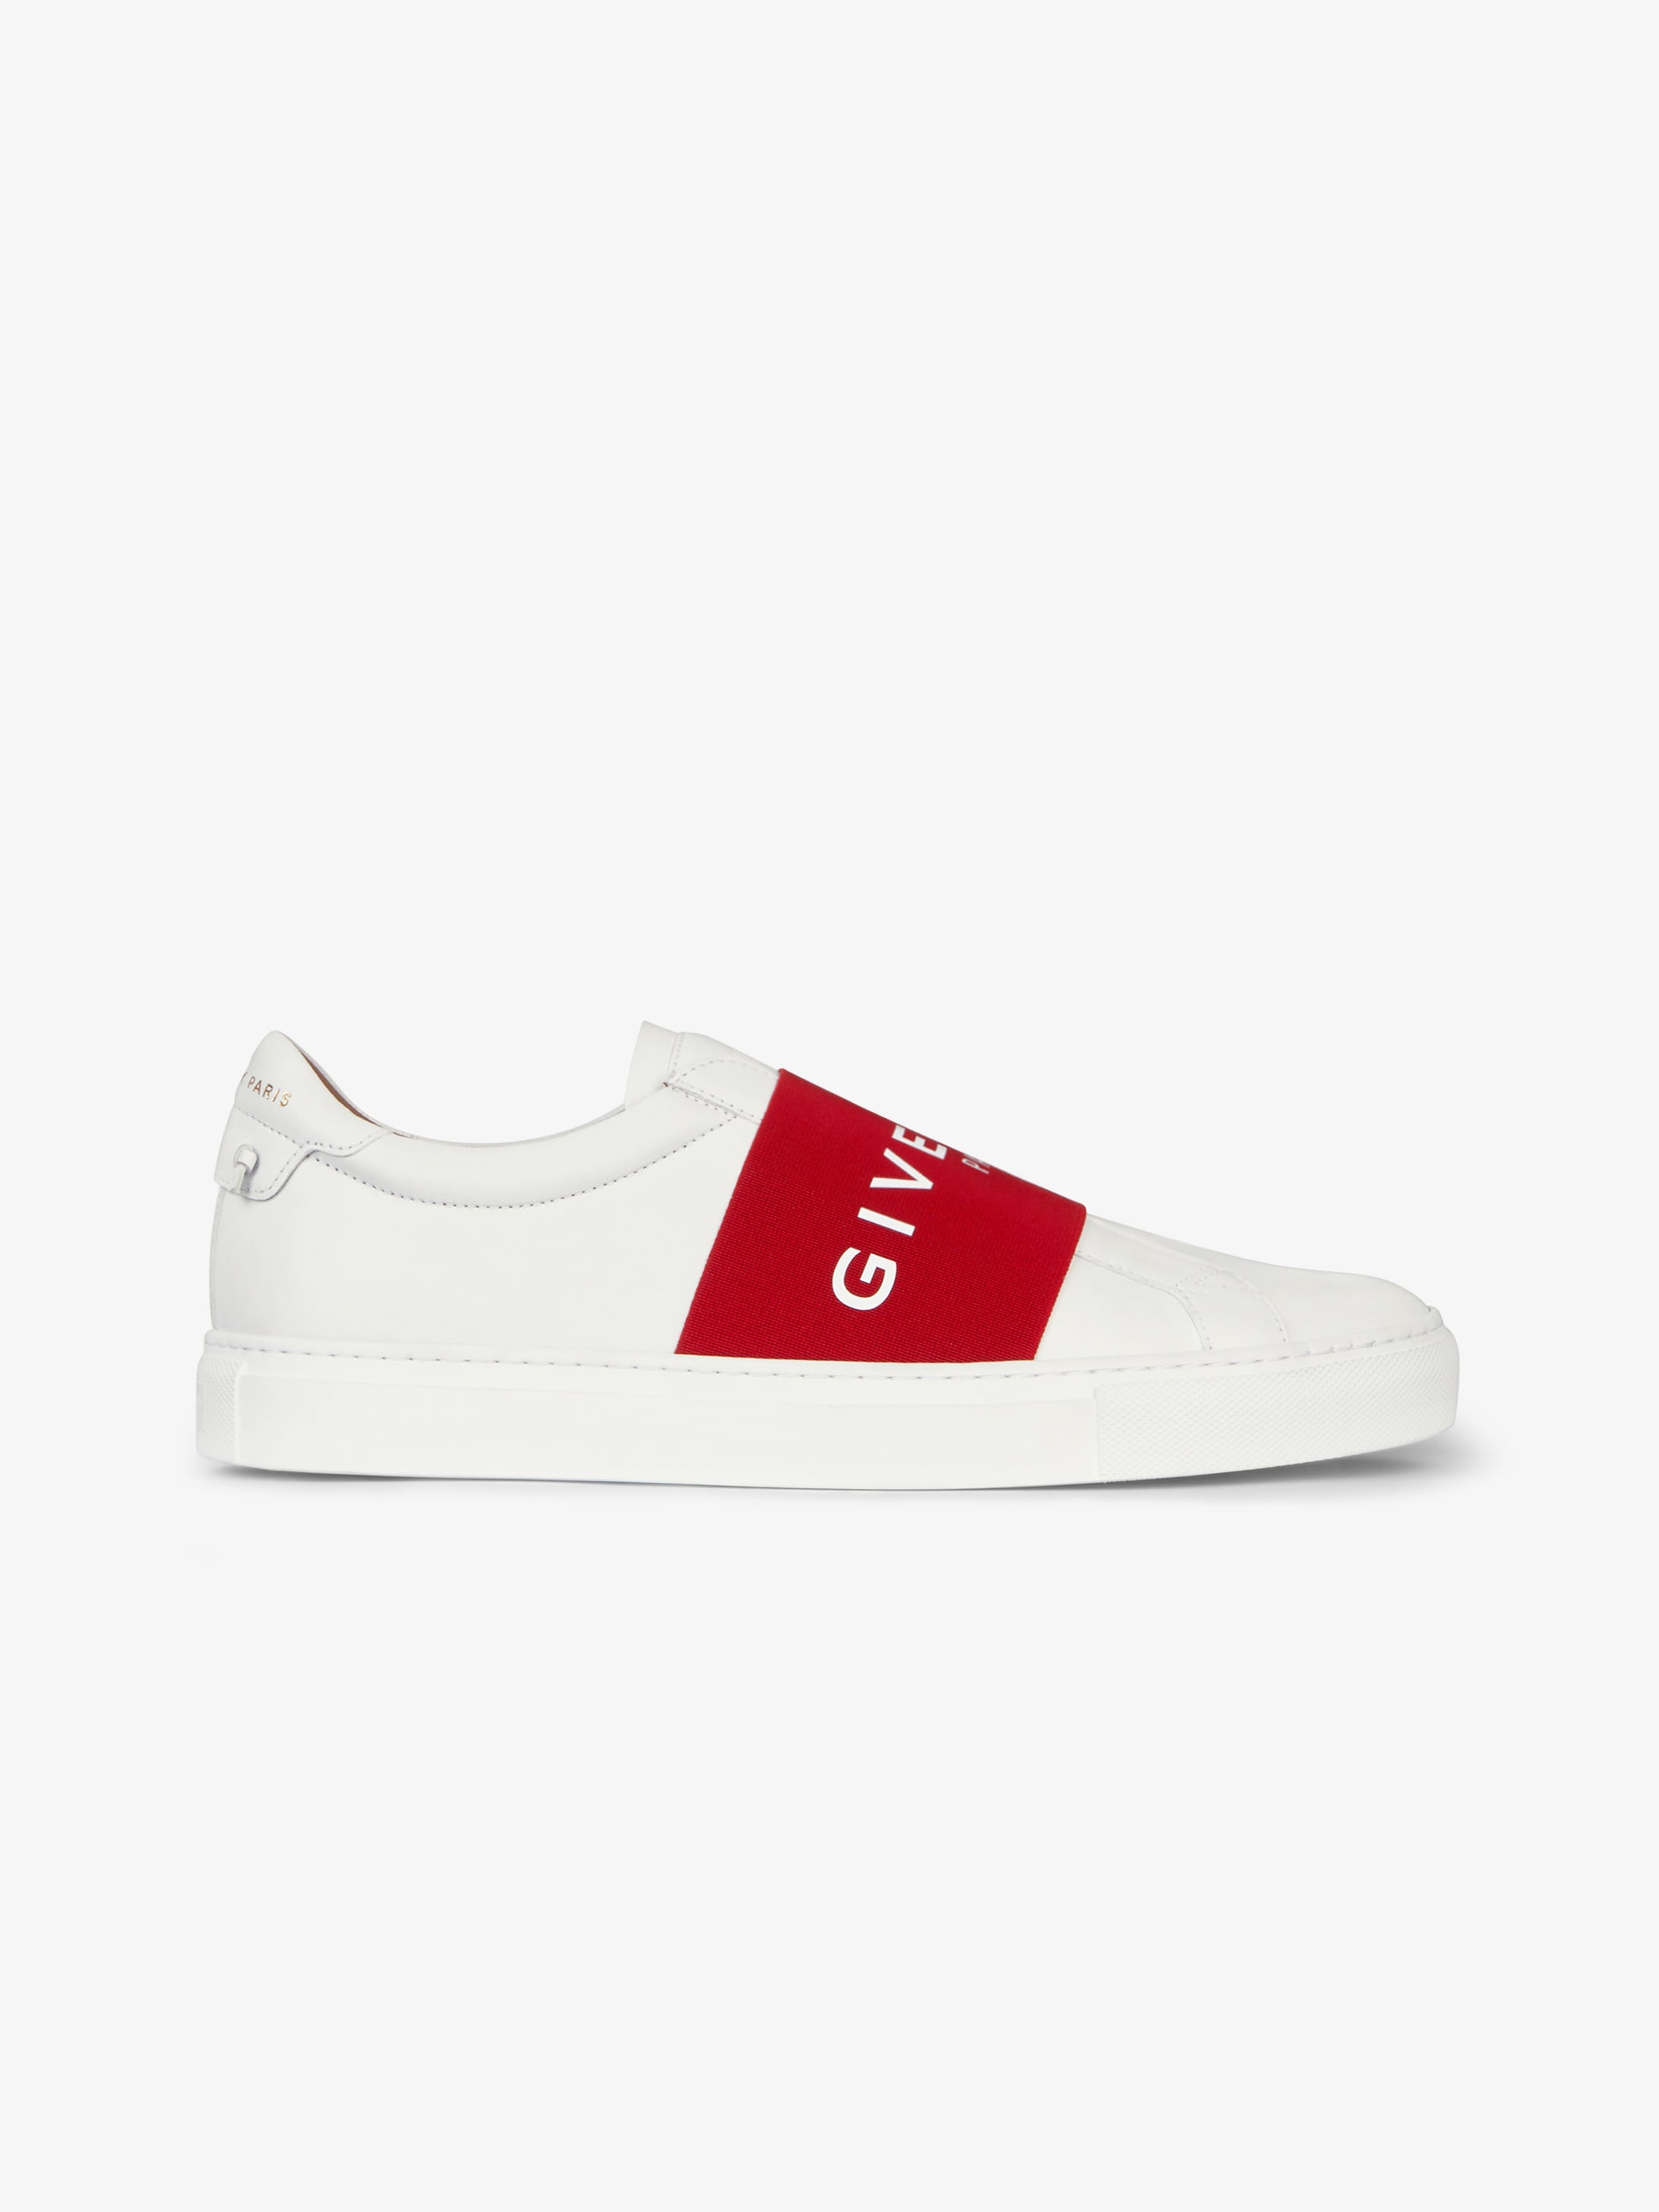 GIVENCHY PARIS webbing sneakers in 